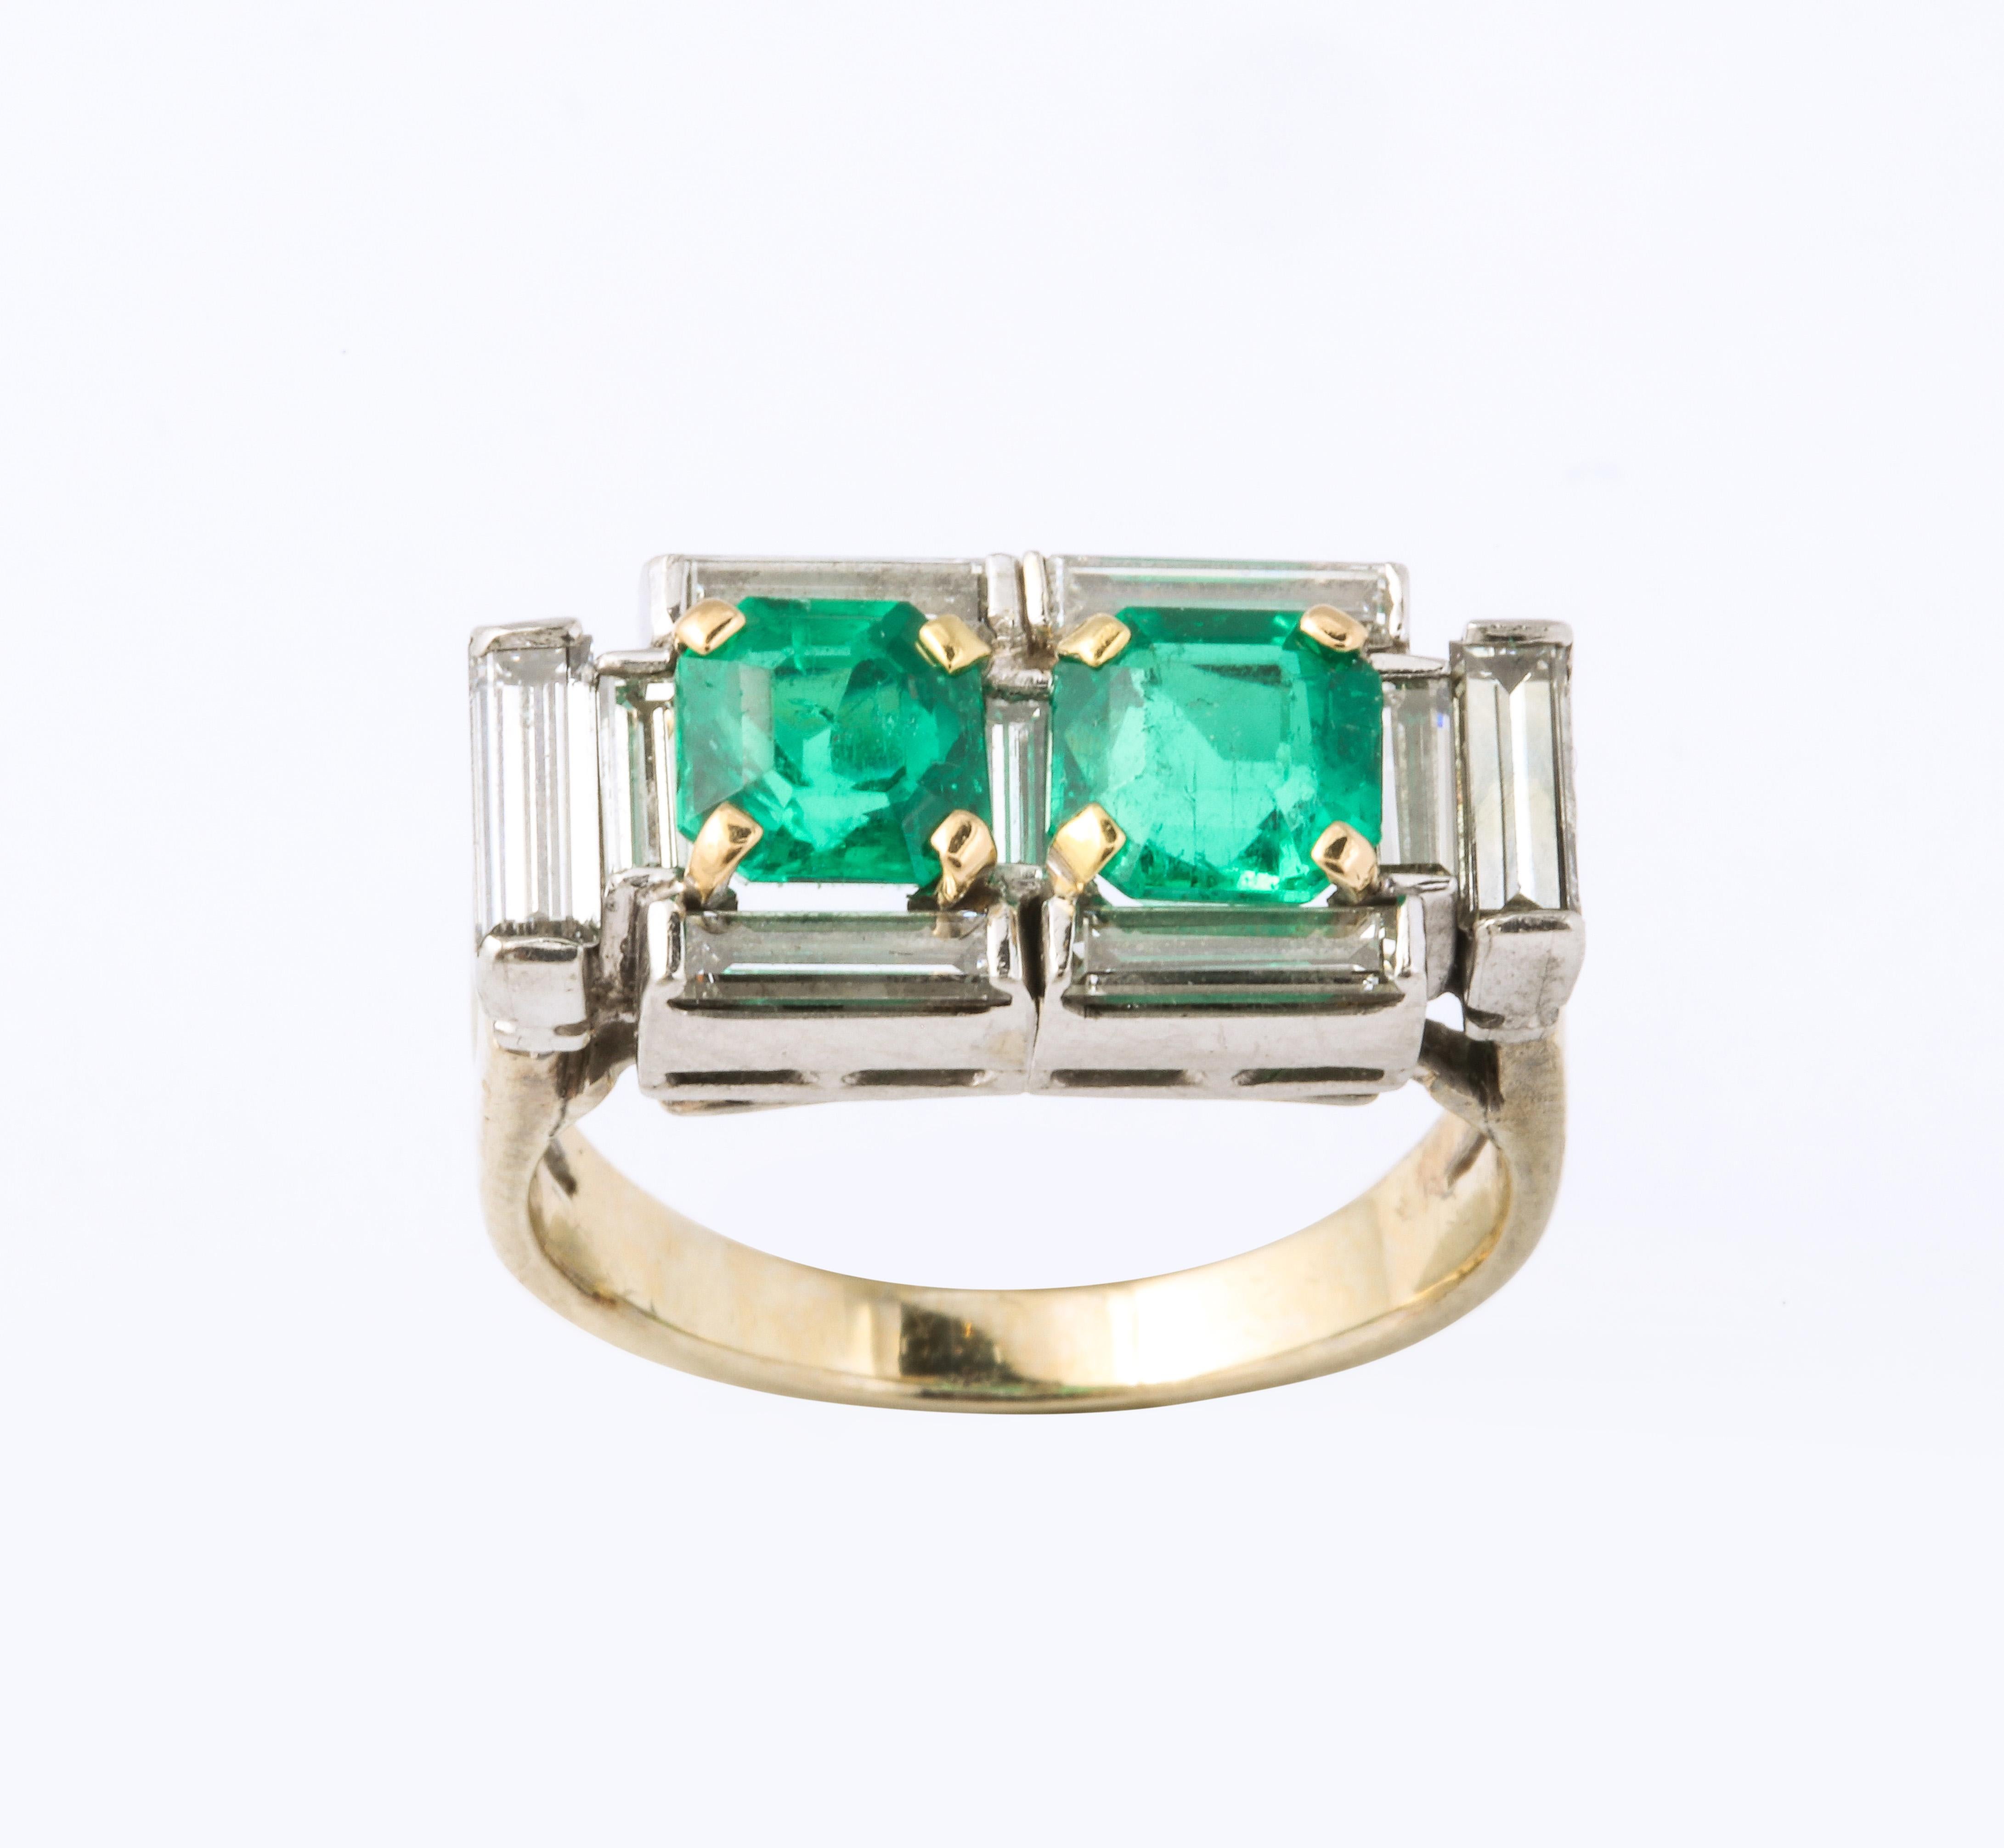 A stunning French Art Deco 2 stone emerald ring with a set of baguette cut diamonds accents  in a platinum and white gold setting. With appraisal